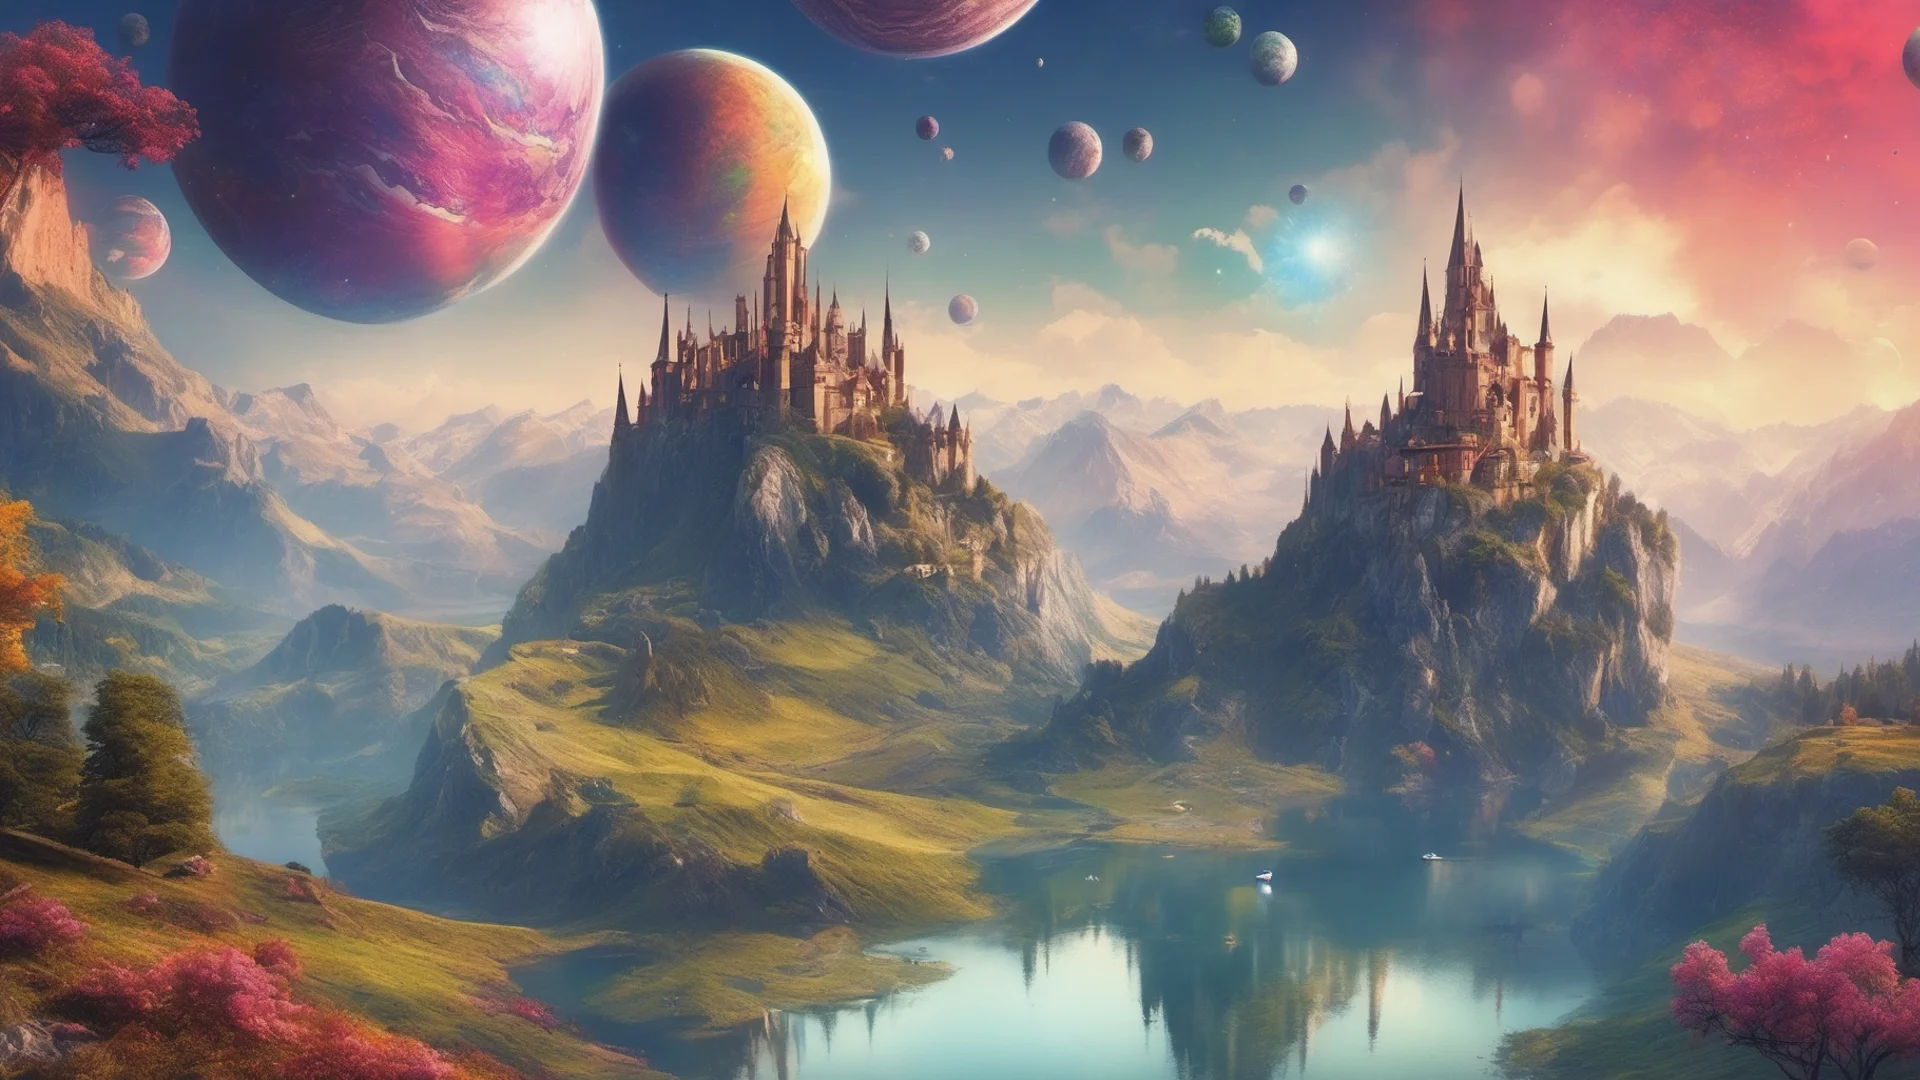 aibeautiful environment castle on mountains with lakes colorful planets wide